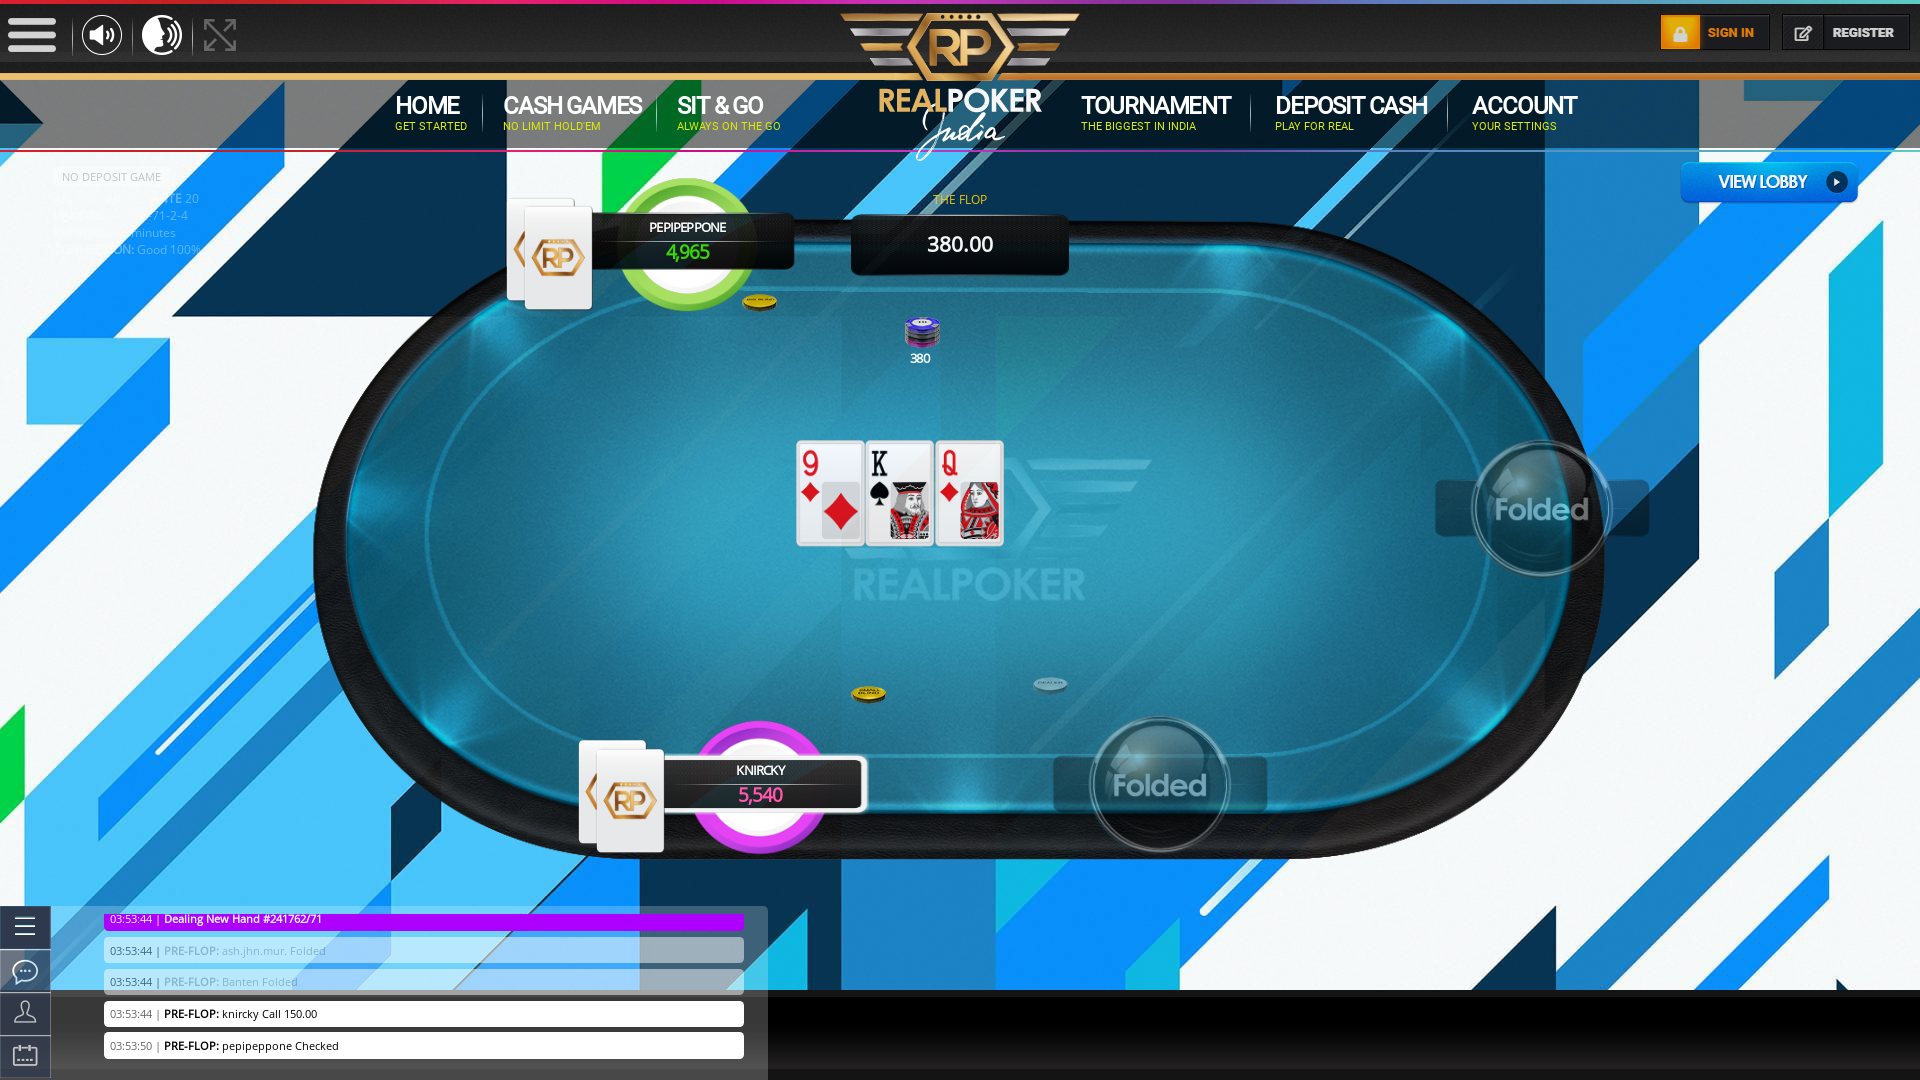 10 player poker in the 42nd minute